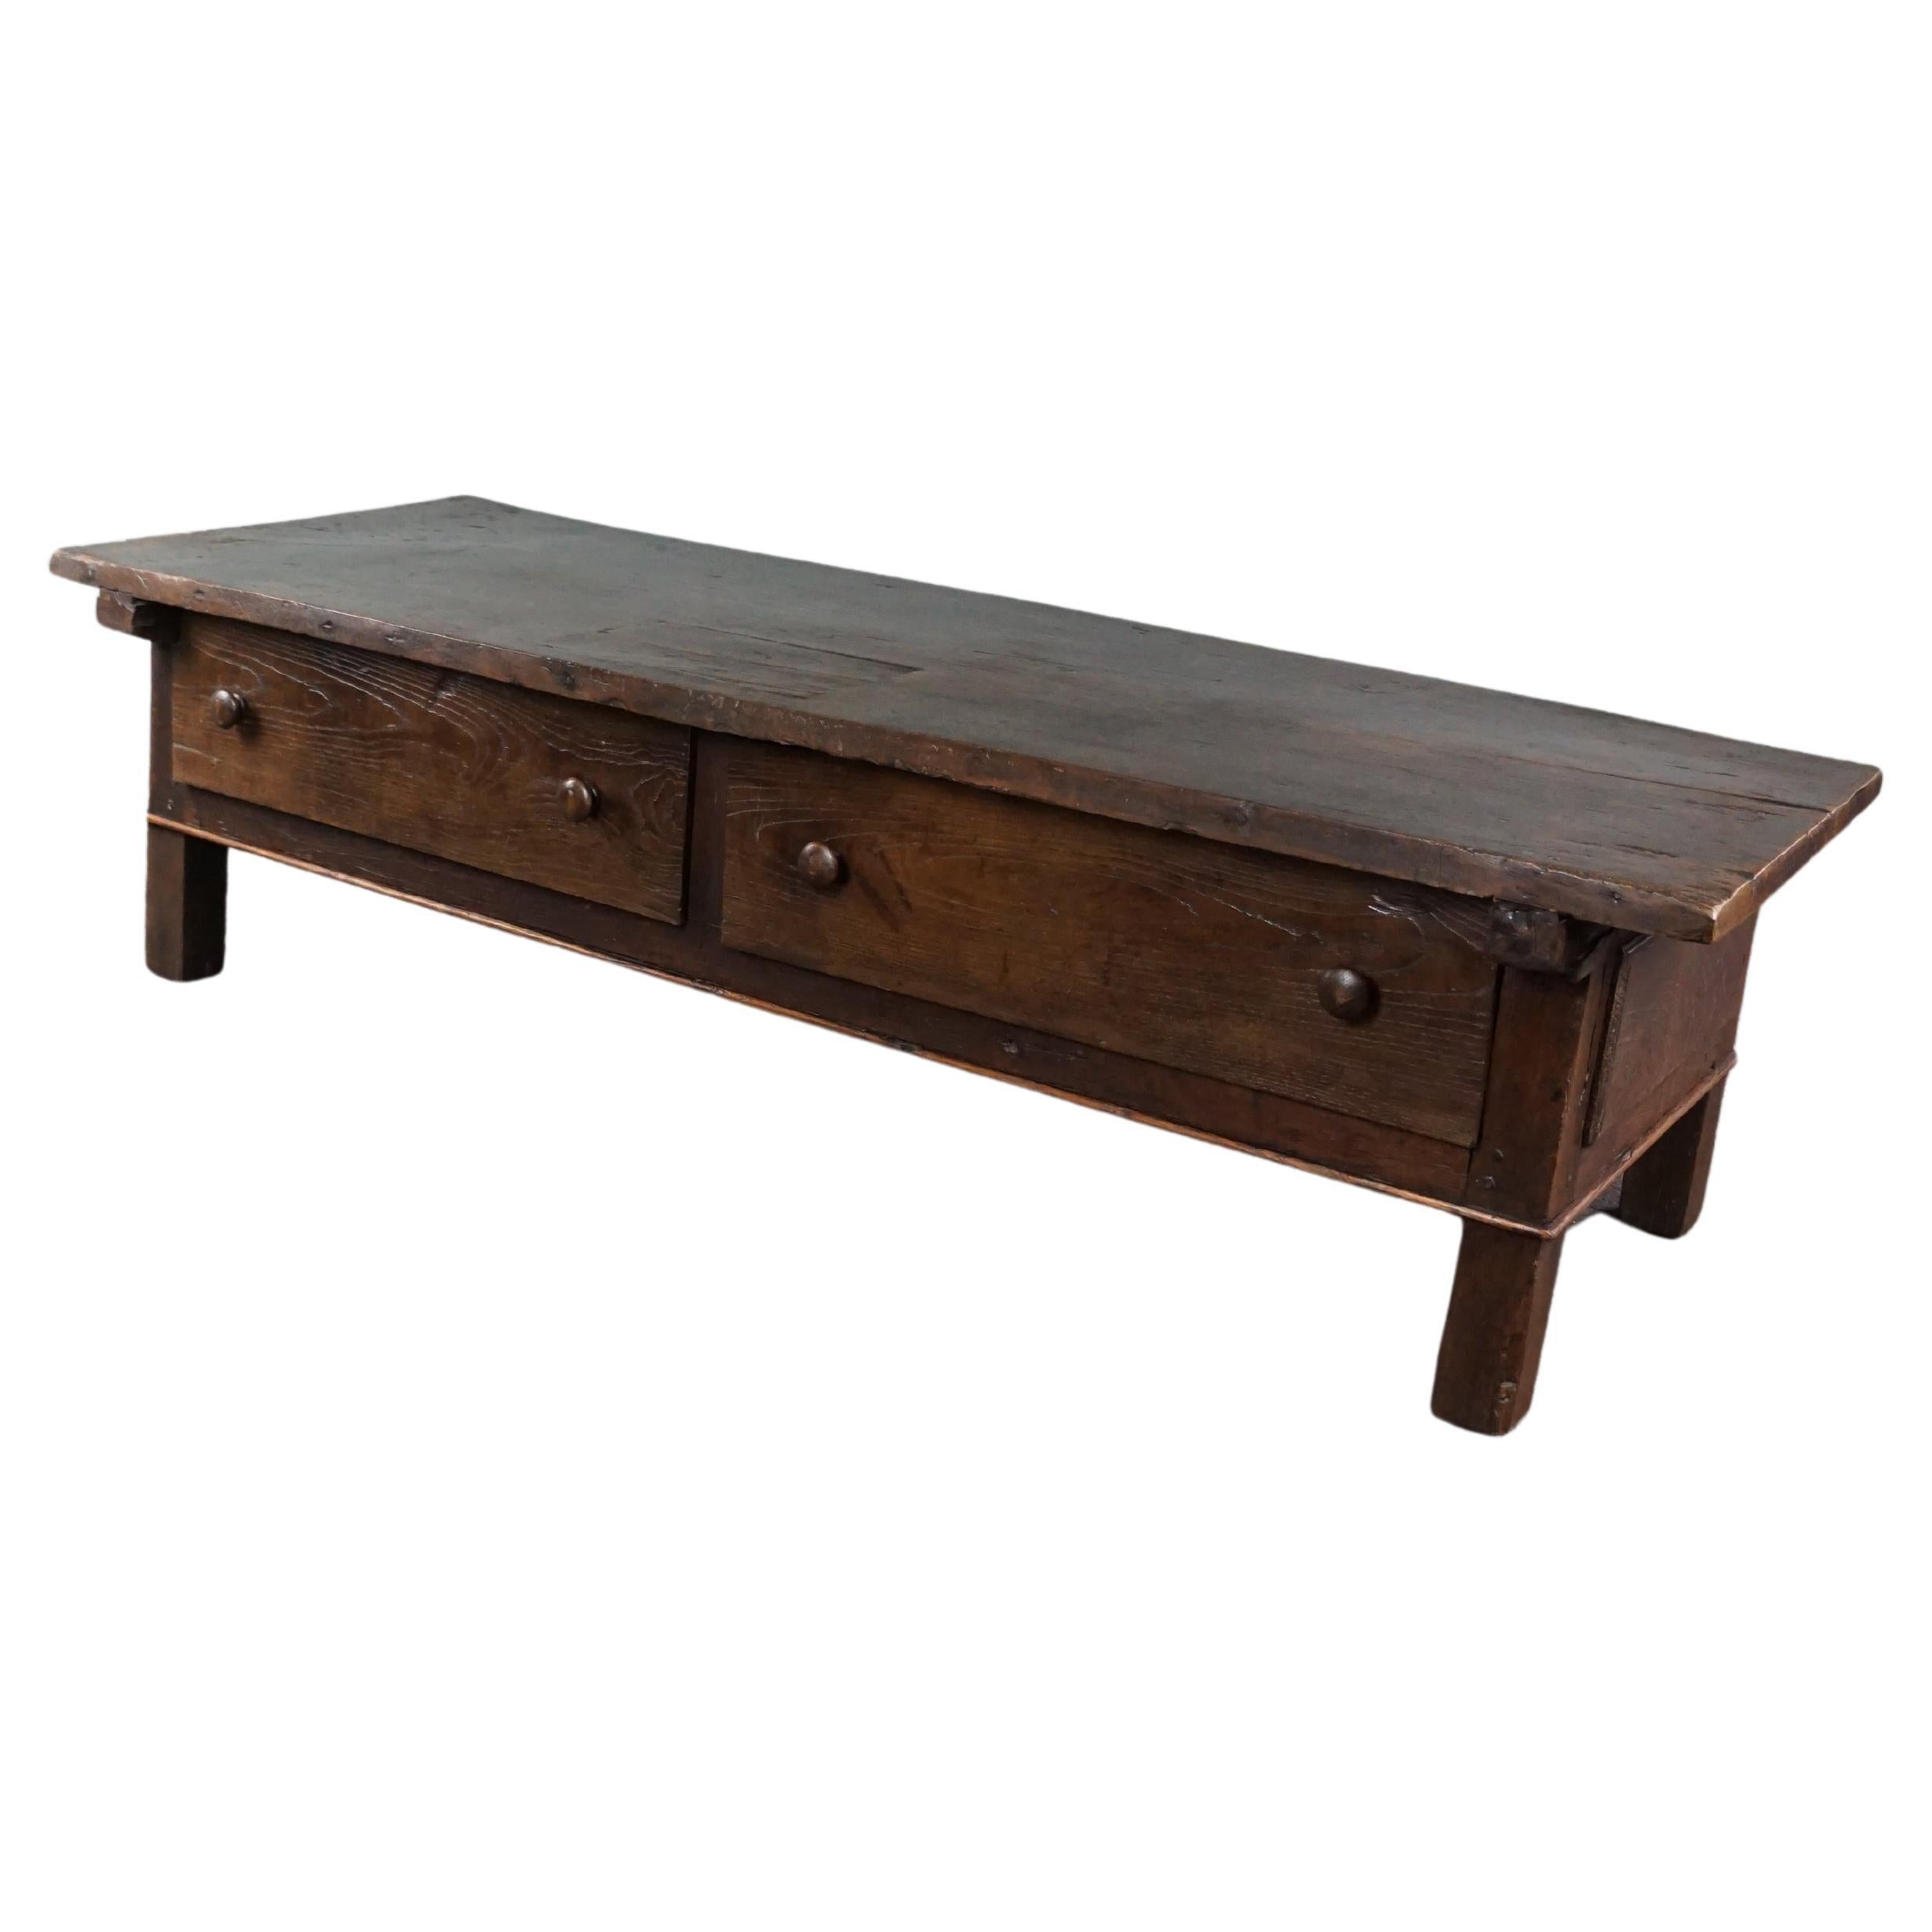 Extremely long antique French coffee table from the early 1800s For Sale